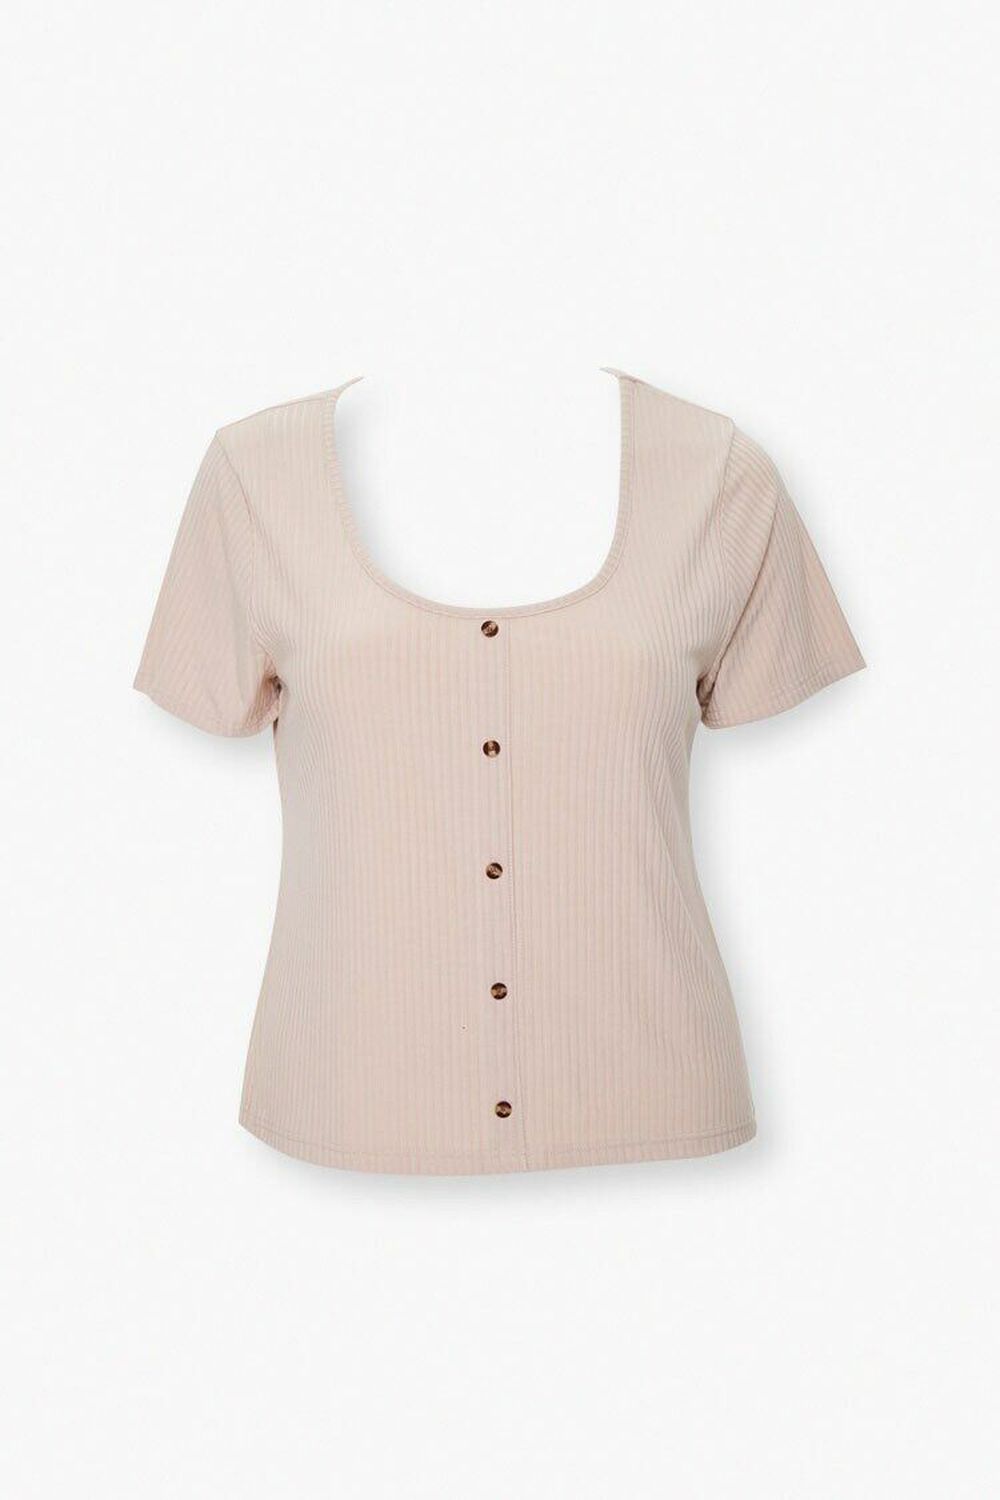 TAUPE Plus Size Ribbed Button-Front Top, image 1